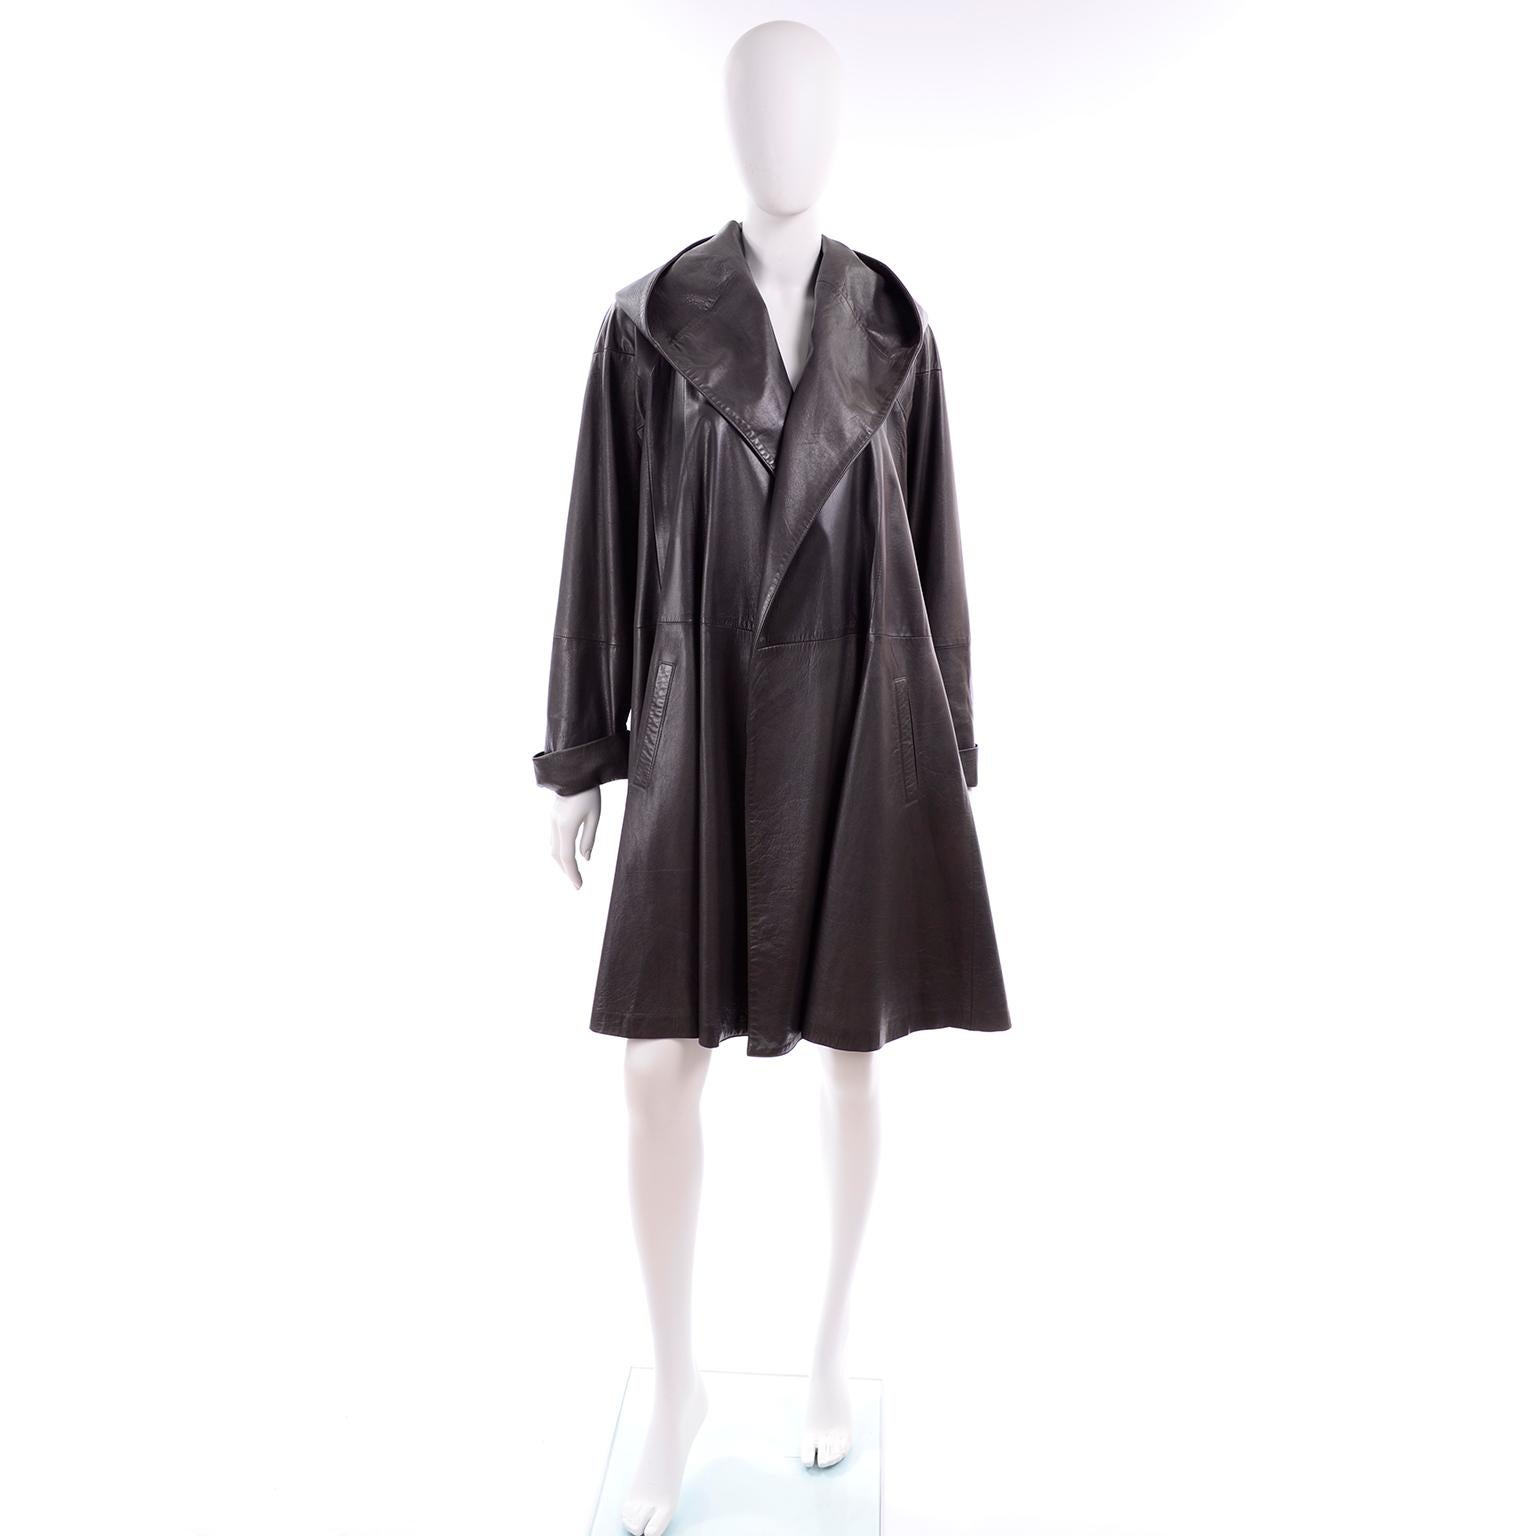 This early 1990's Donna Karan swing coat is one of the most incredible vintage leather coats we've seen in a while! The coat has a gorgeous hood that looks almost like a shawl collar, side slash pockets and it is fully lined in silk.  It is open in